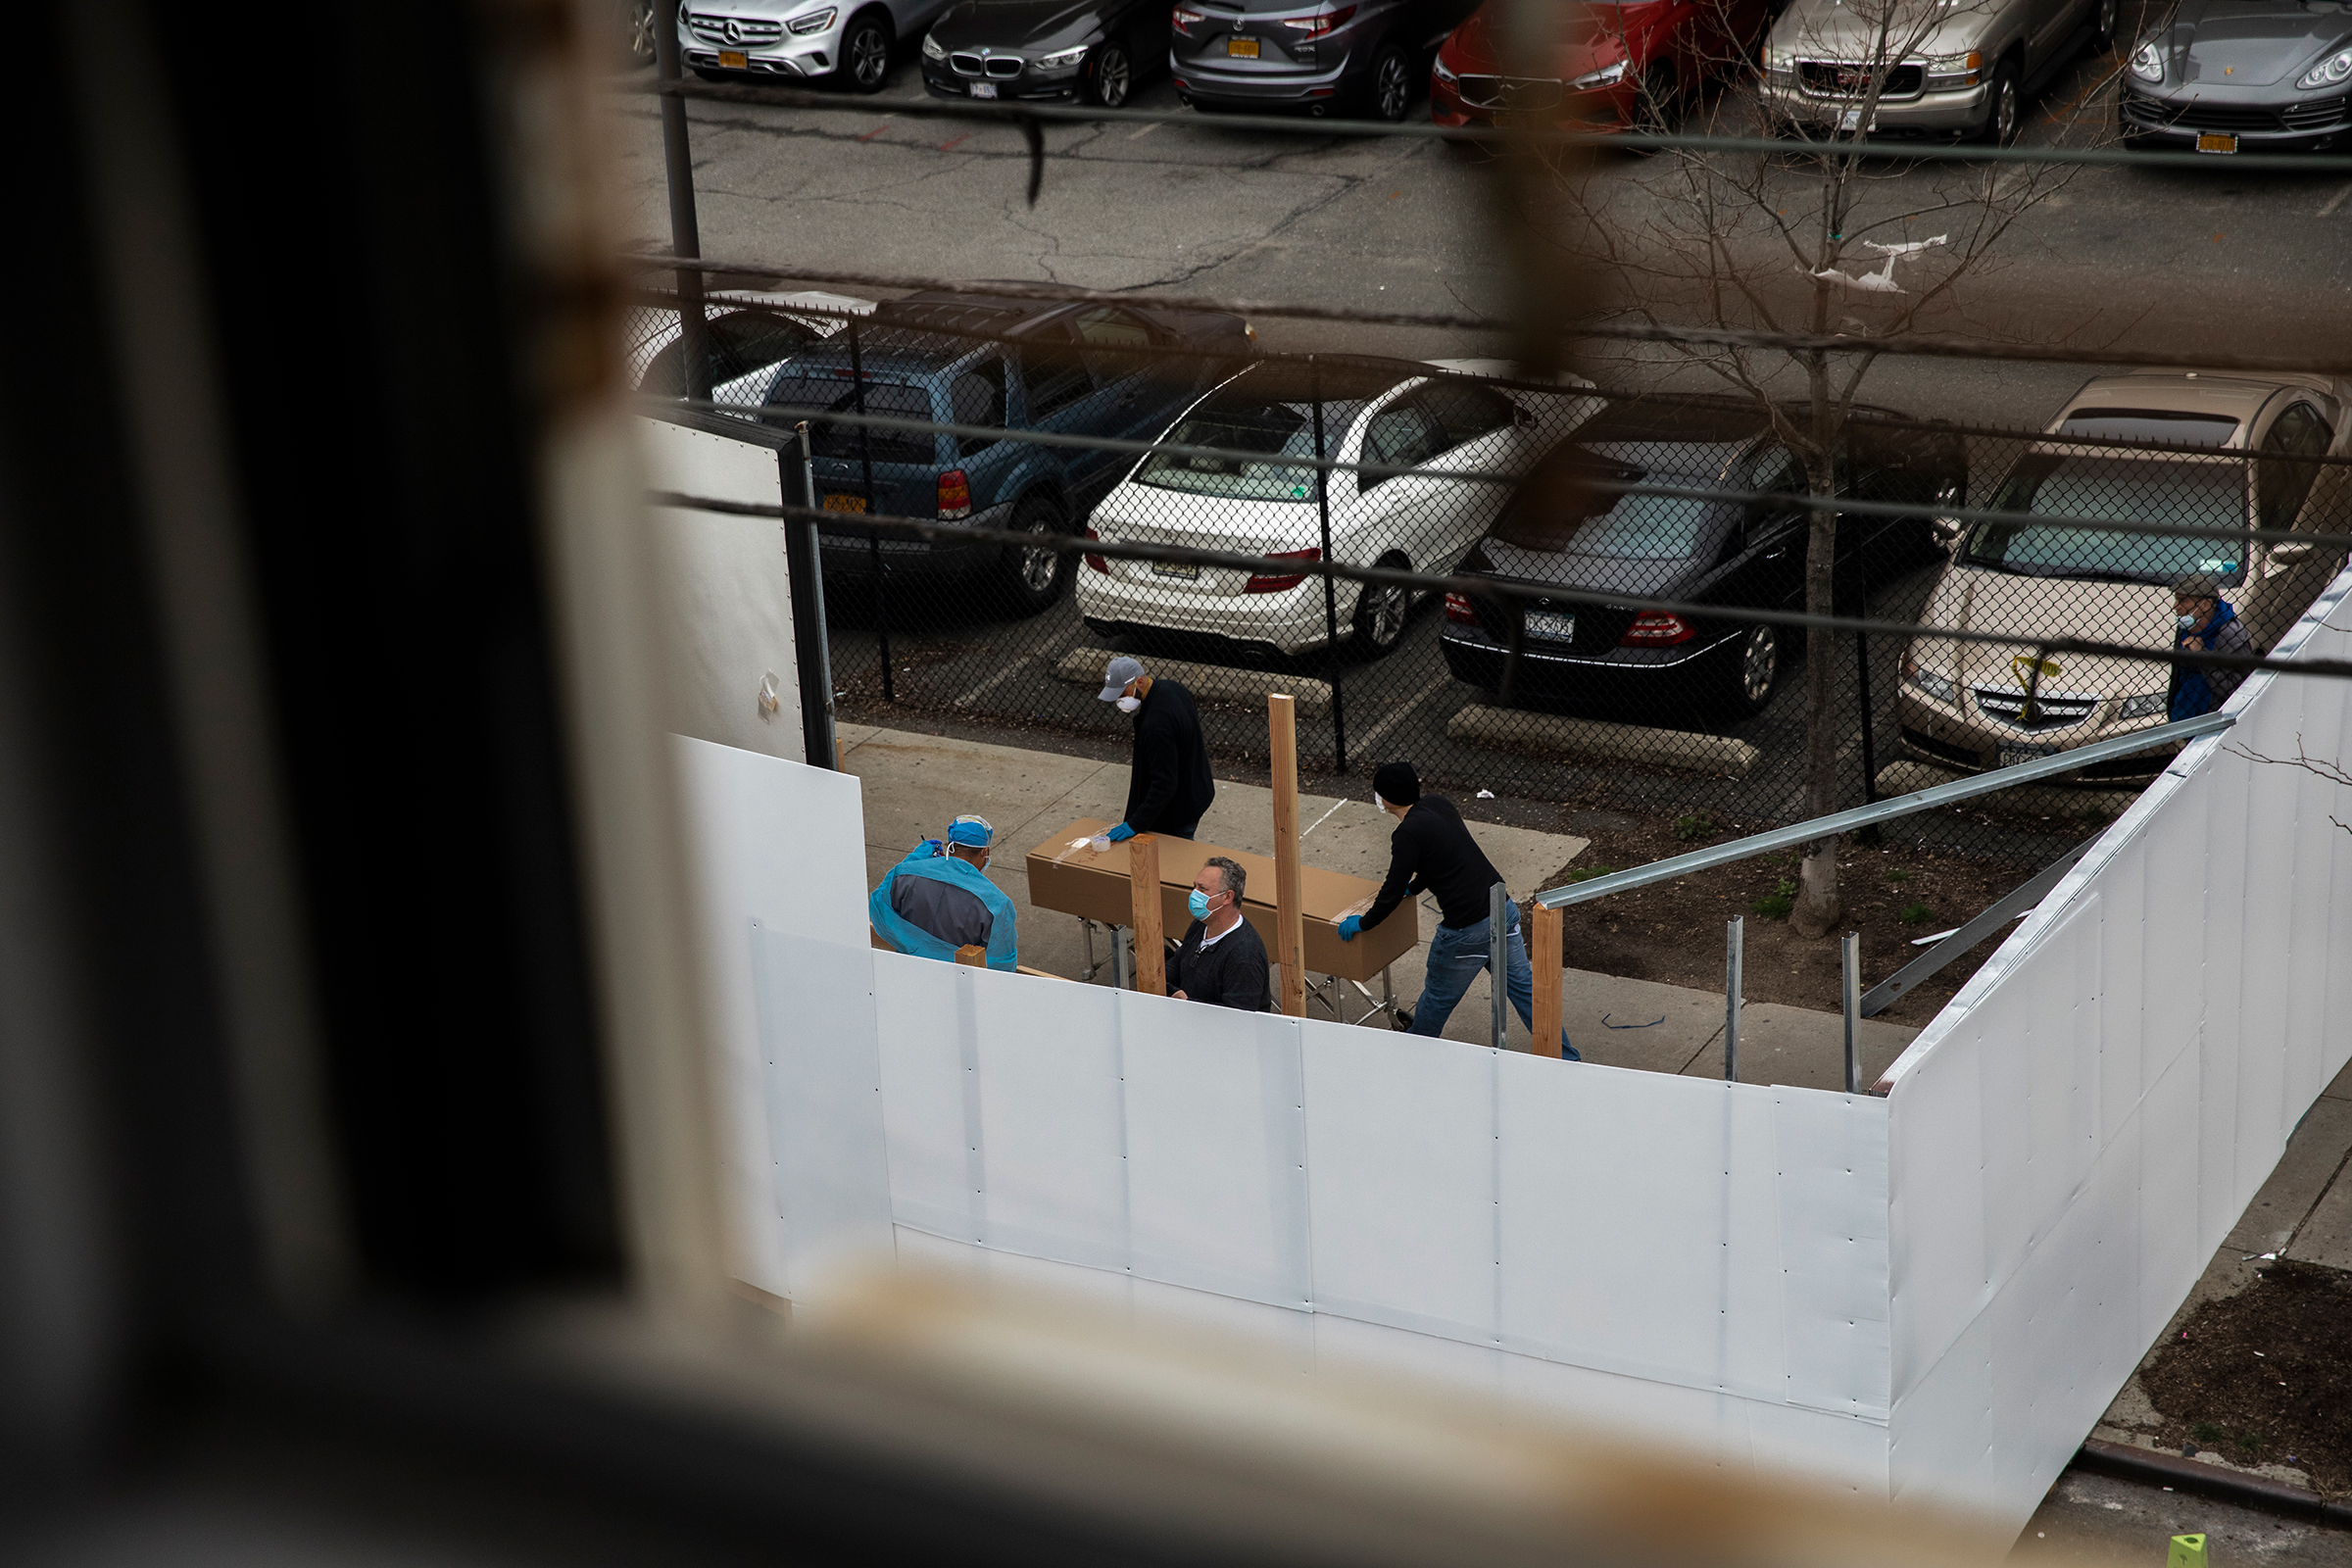 Workers transport a casket-sized box near the morgue set up outside Wyckoff Heights Medical Center in Brooklyn on March 30. (Benjamin Norman for TIME)